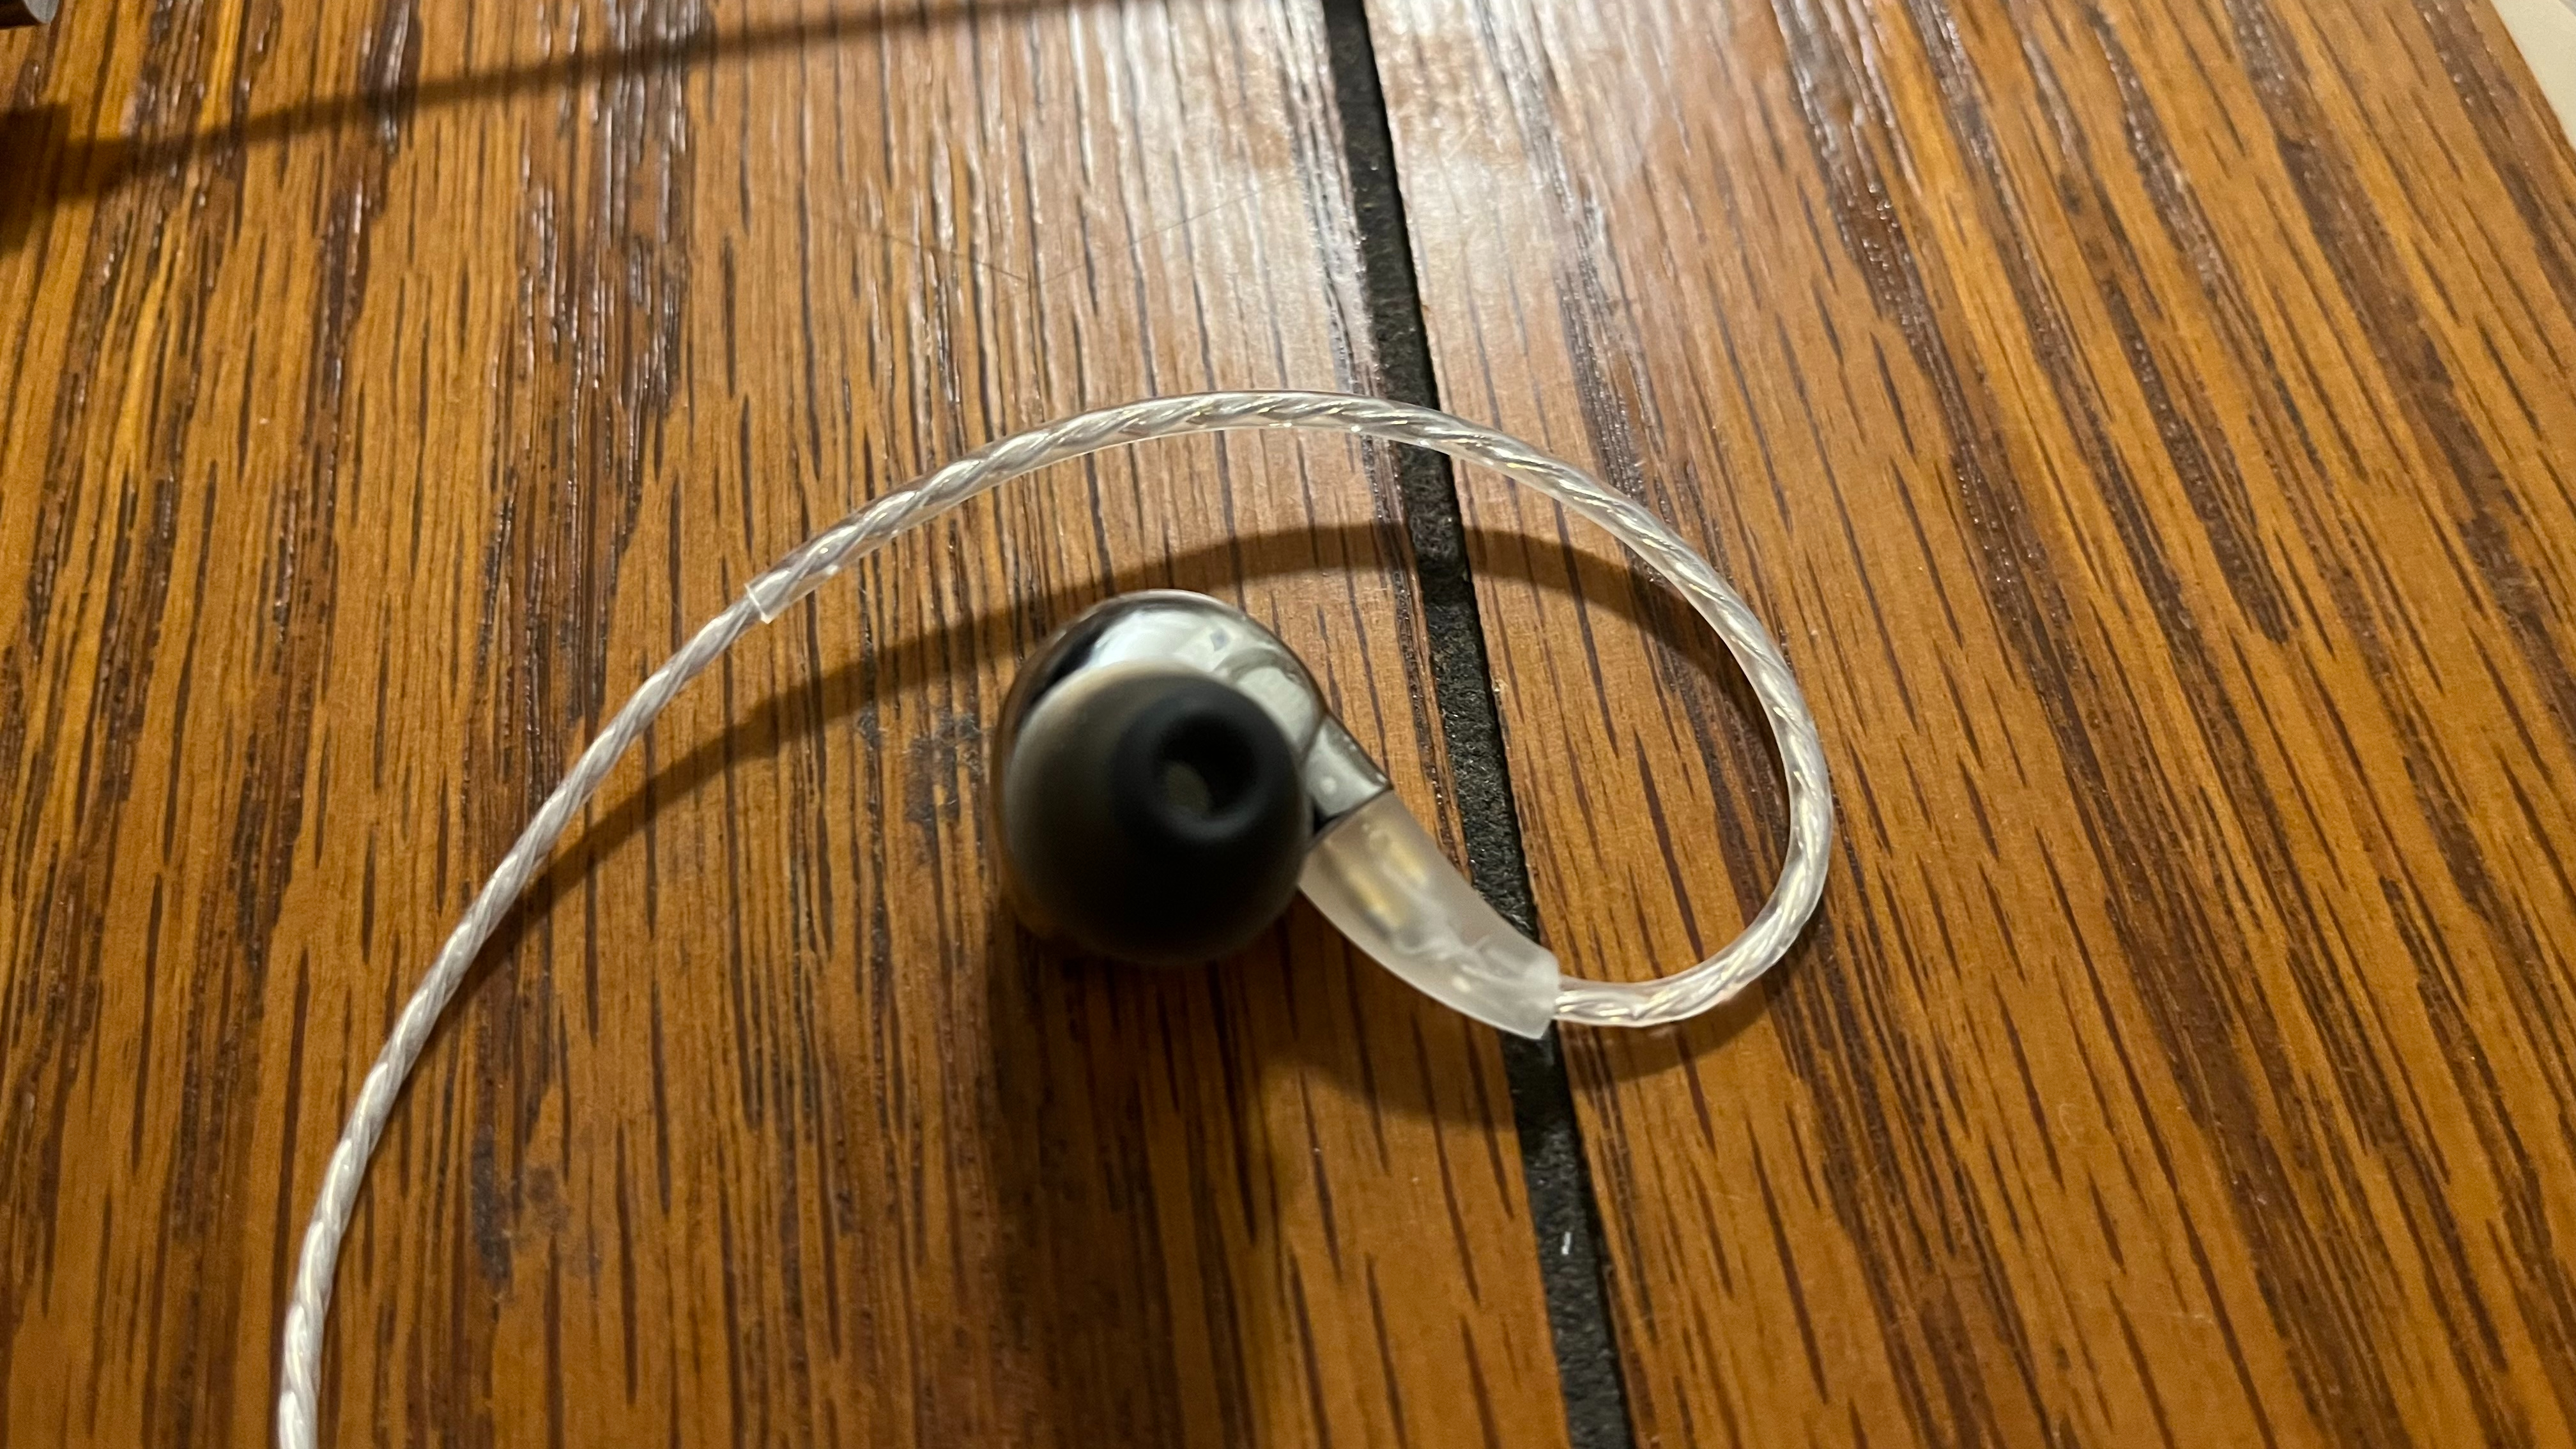 Questyle NHB15 earbud on table